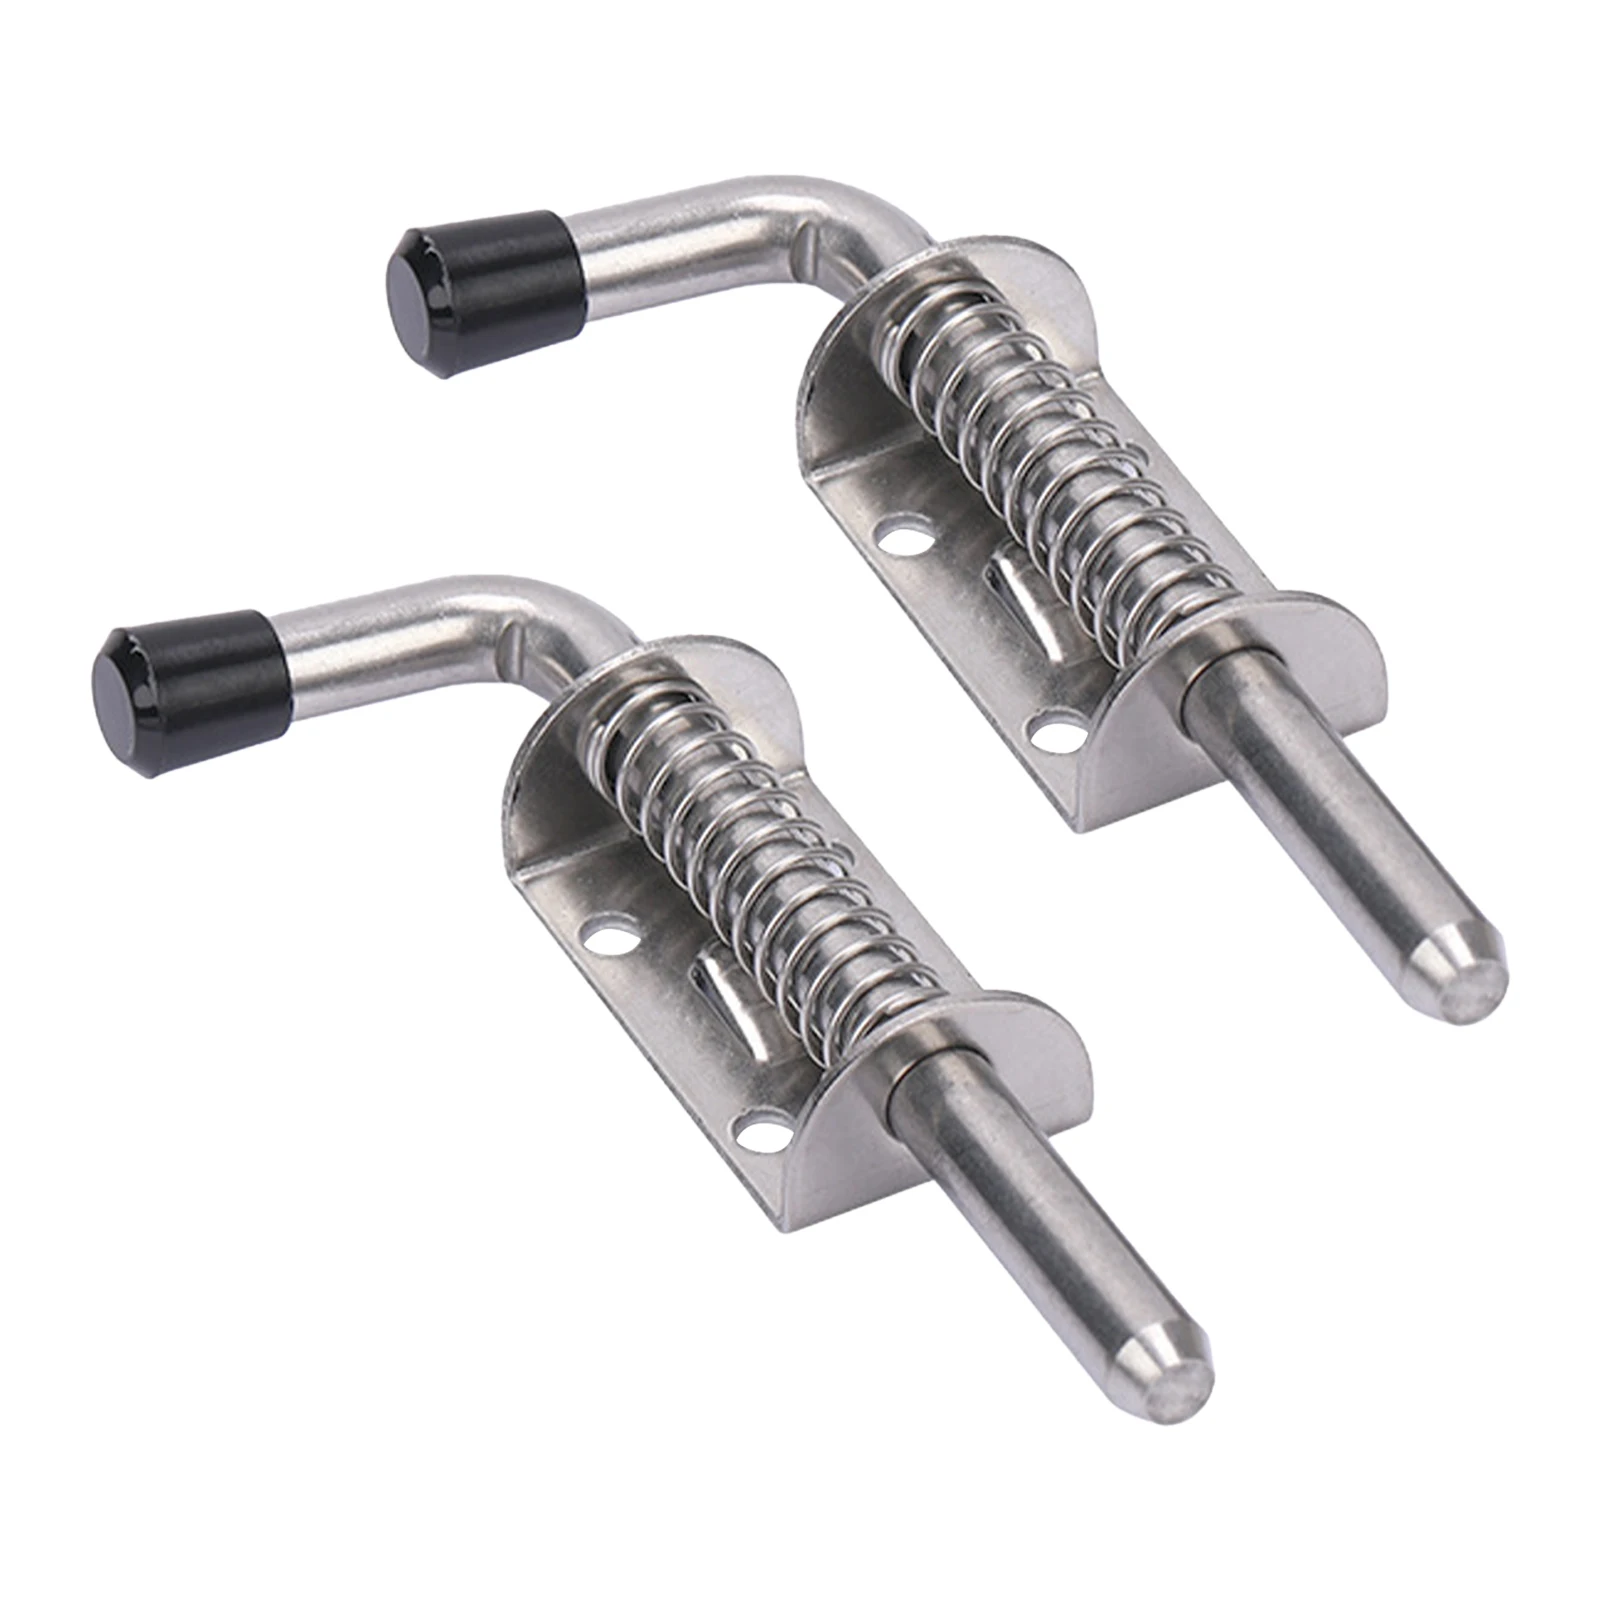 

2pcs Outdoor Stainless Steel Spring Loaded Sliding Latch Pin Heavy Duty Chests Cabinets Solid Hardware Door Lock Barrel Bolt